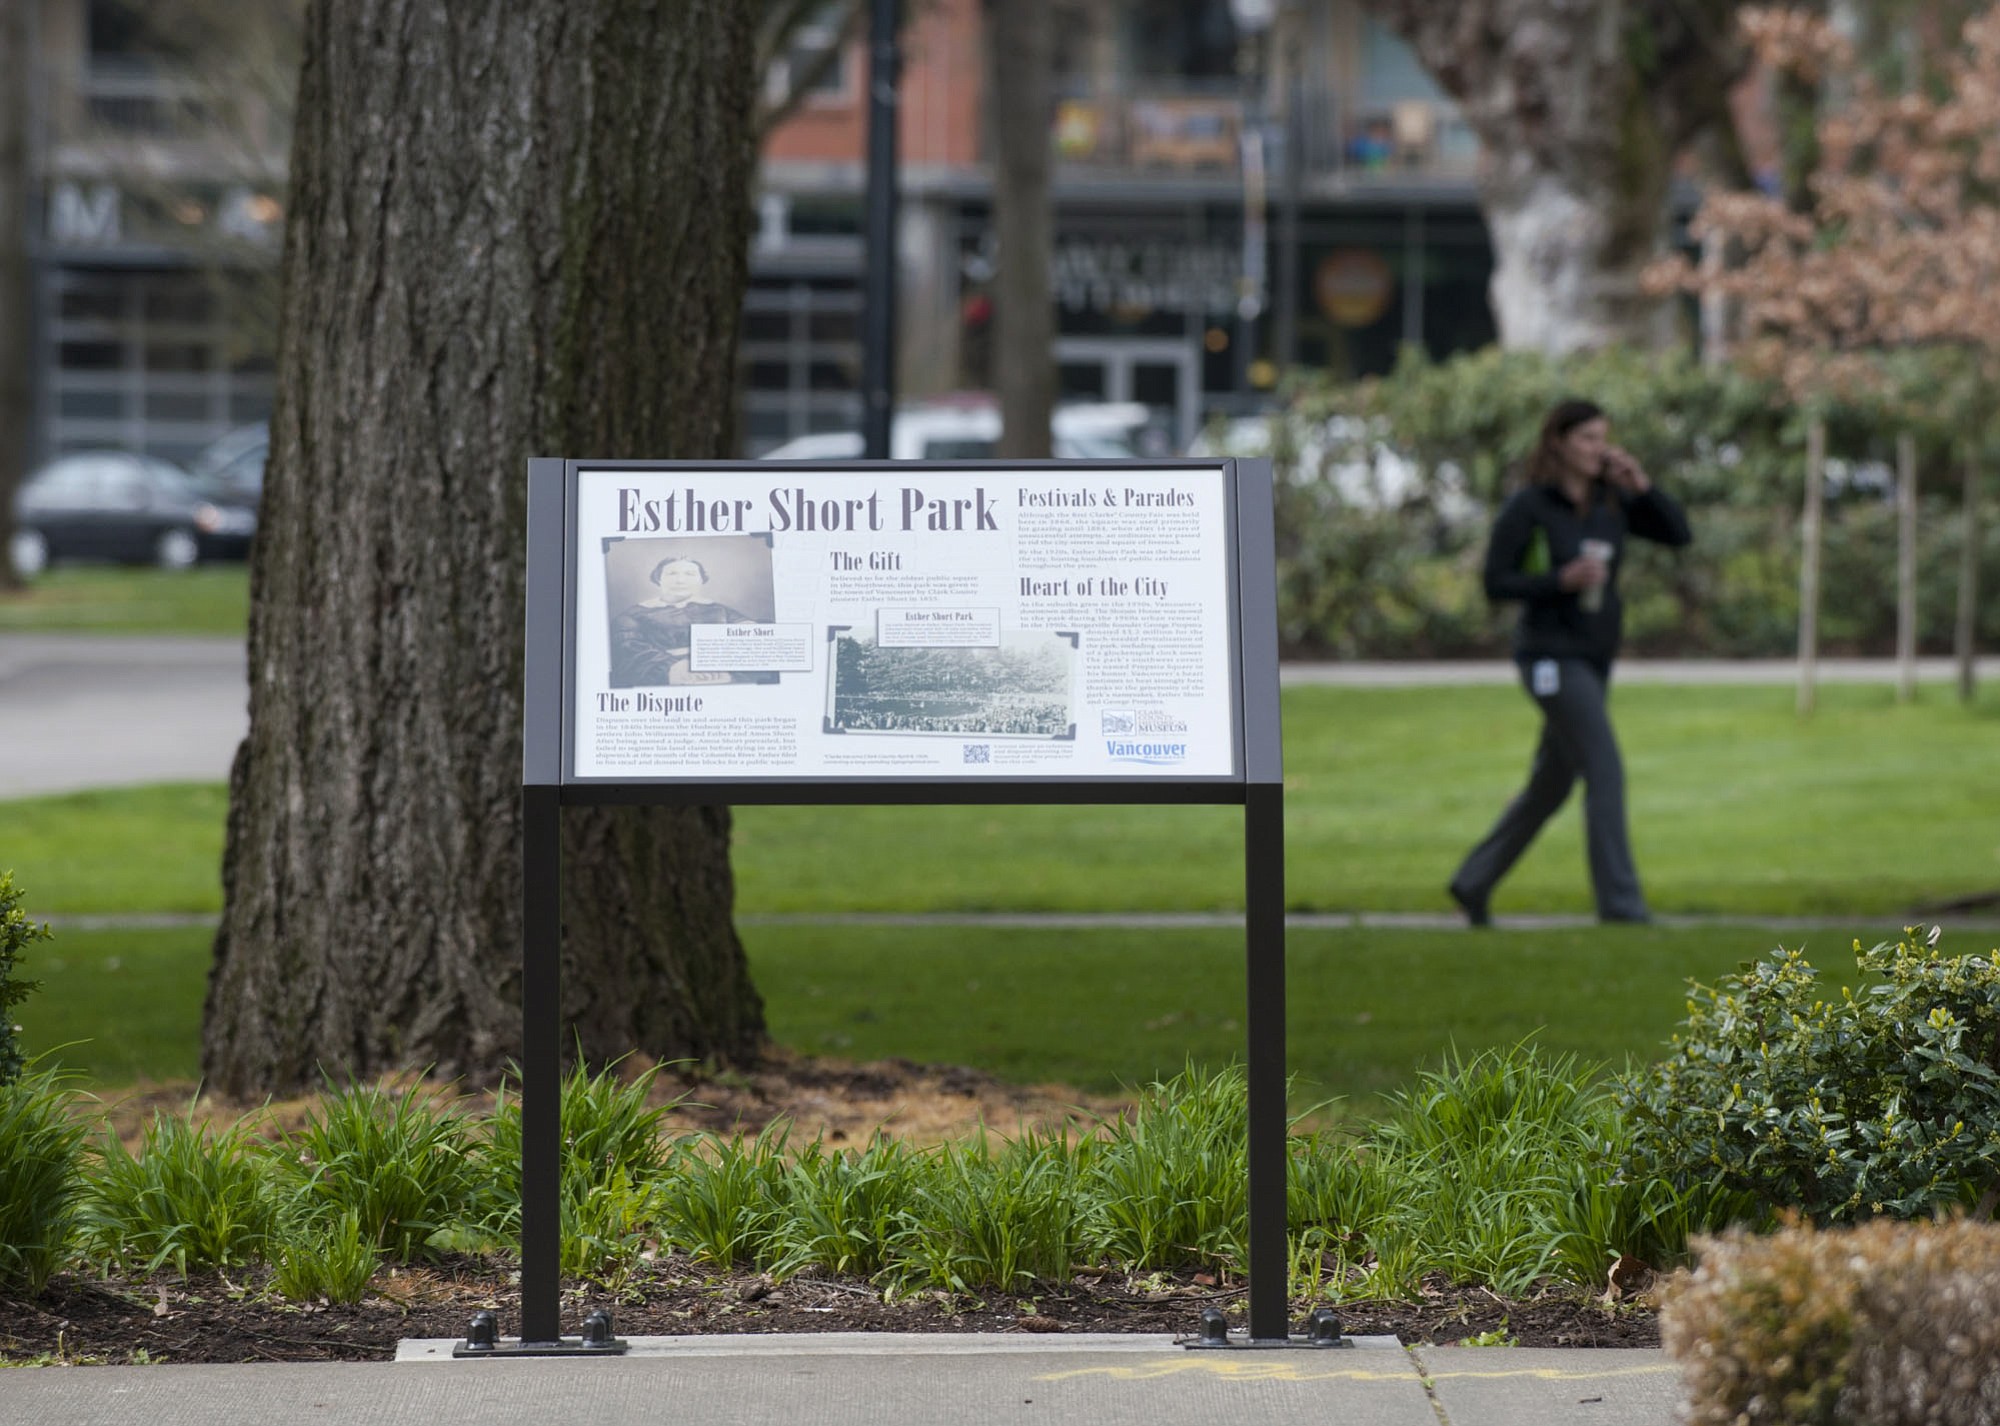 An interpretive panel describes the history of Esther Short Park and the Short family.